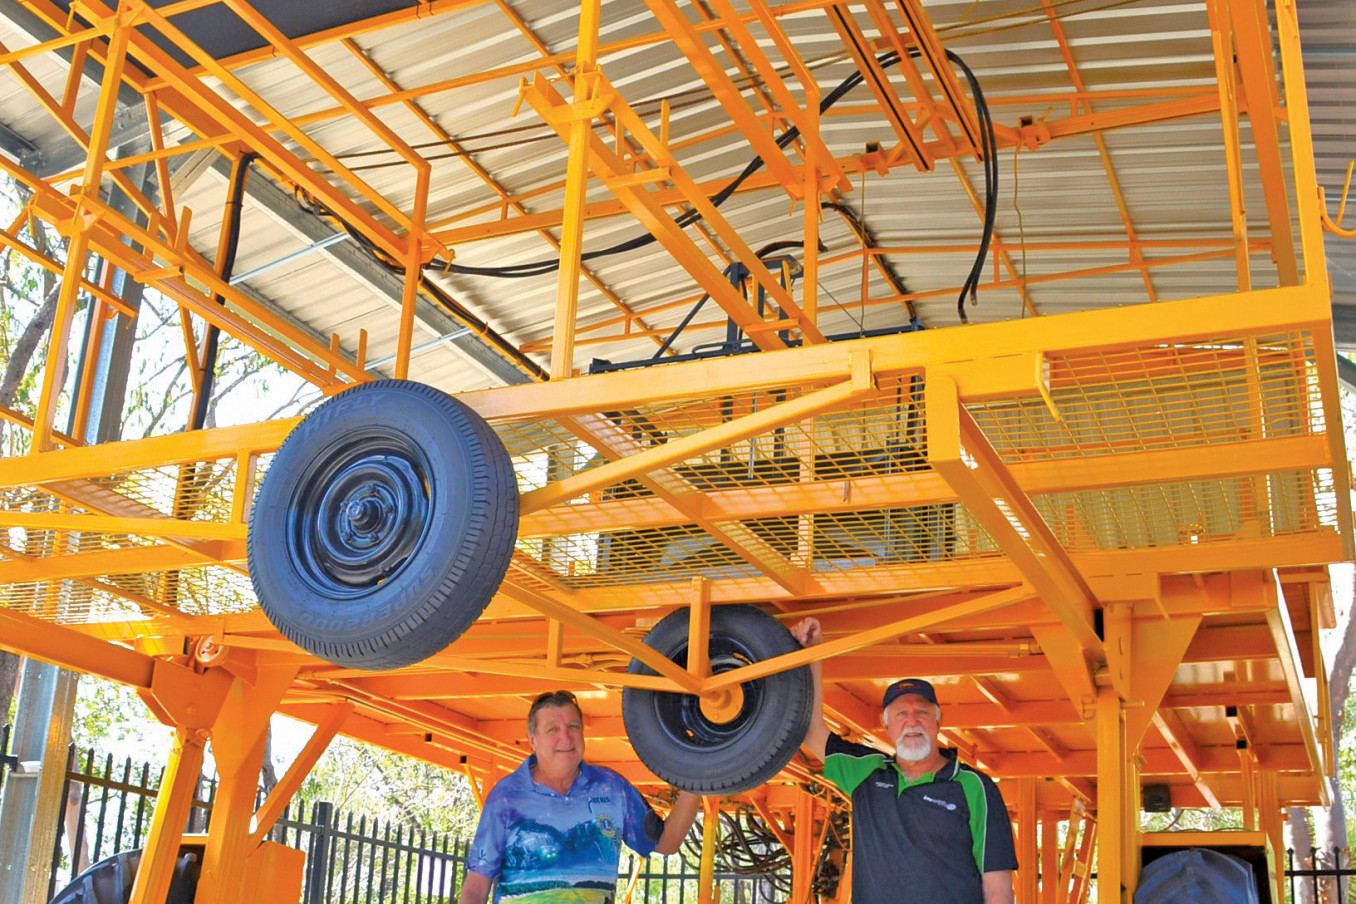 Mareeba Lions Club member Denis McKinley and Dimbulah Lions Club member Eddie Toffanello in front of a locally manufactured tobacco picking machine which is now on display in front of the Mareeba Heritage Museum.